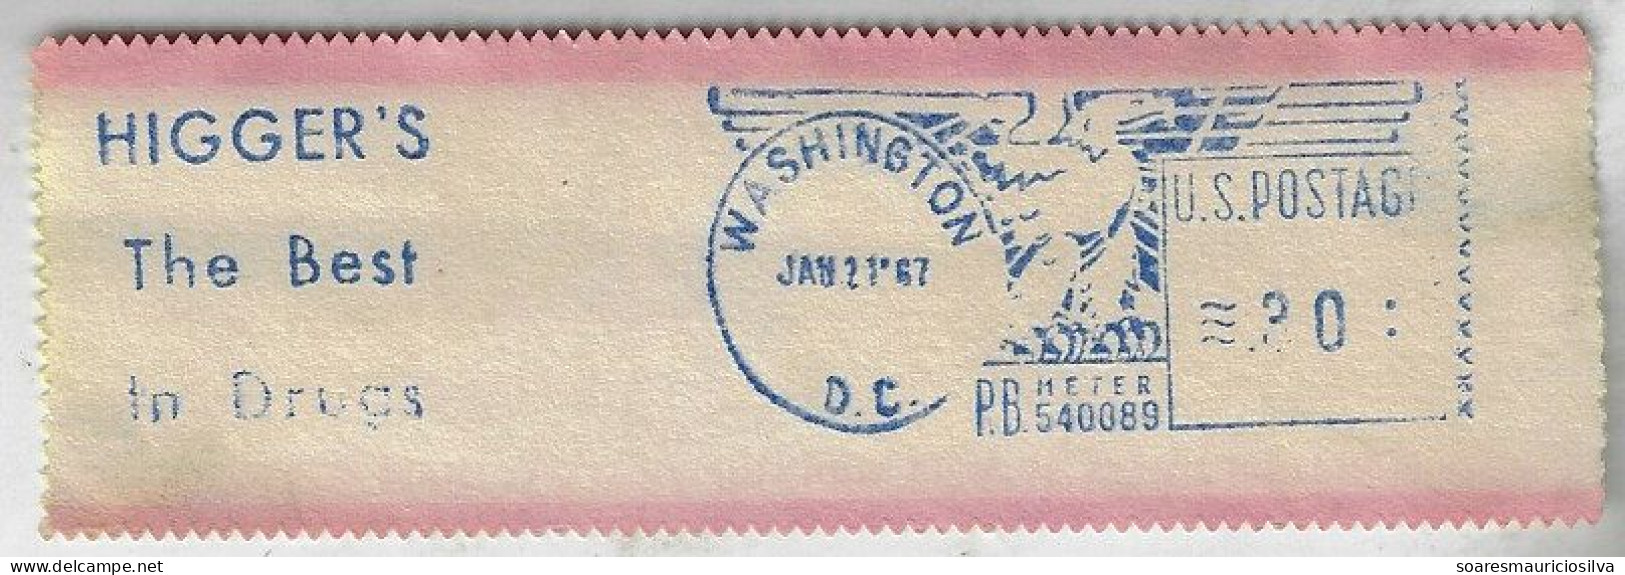 USA 1967 Label With Meter Stamp Pitney Bowes Slogan Higger's The Best In Drugs From Washington 30 Cents - Drogue